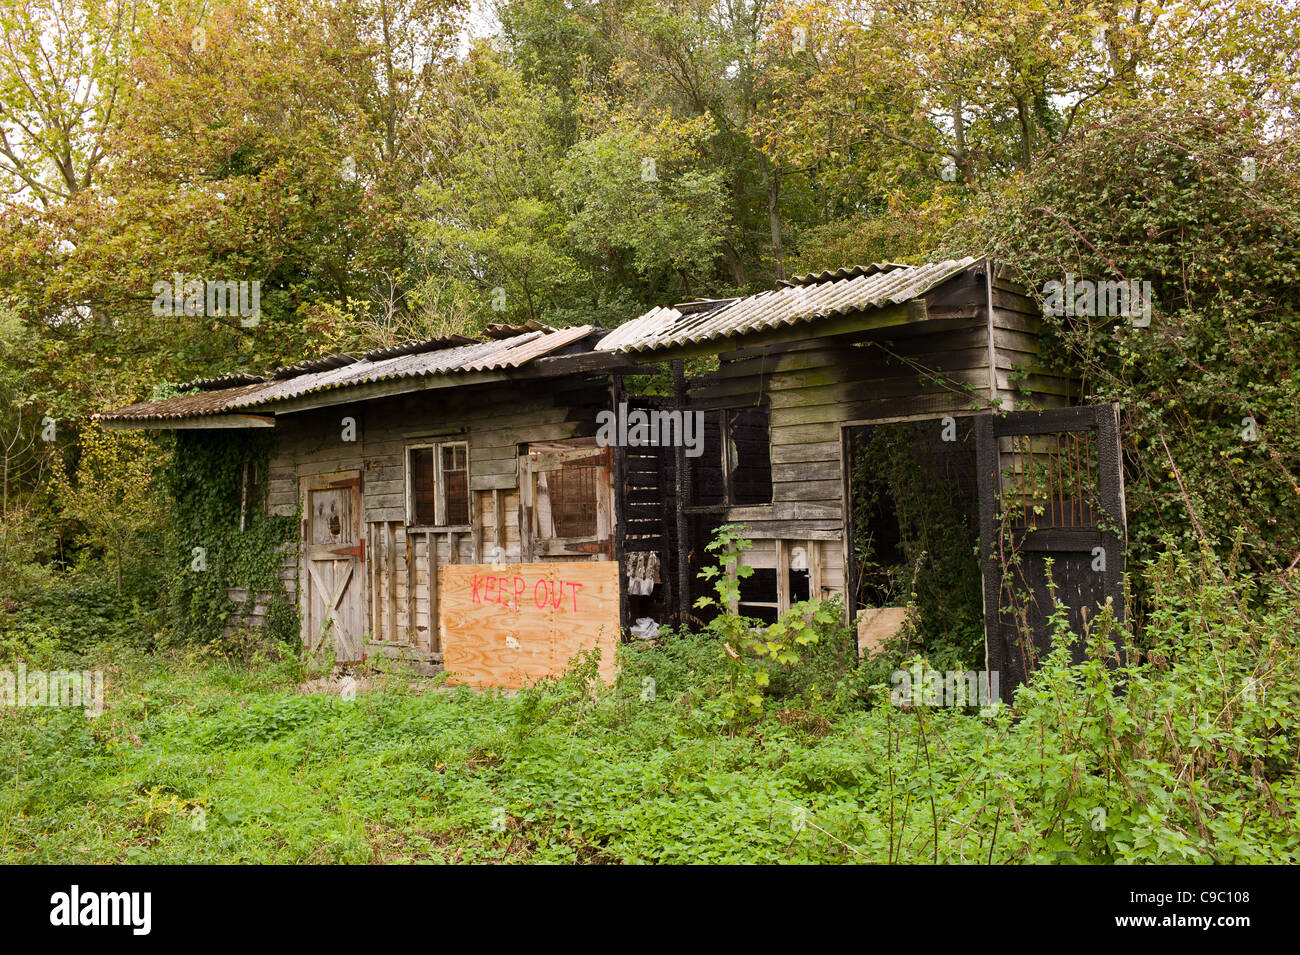 Tumbledown burnt out cabin Arundel West Sussex Stock Photo